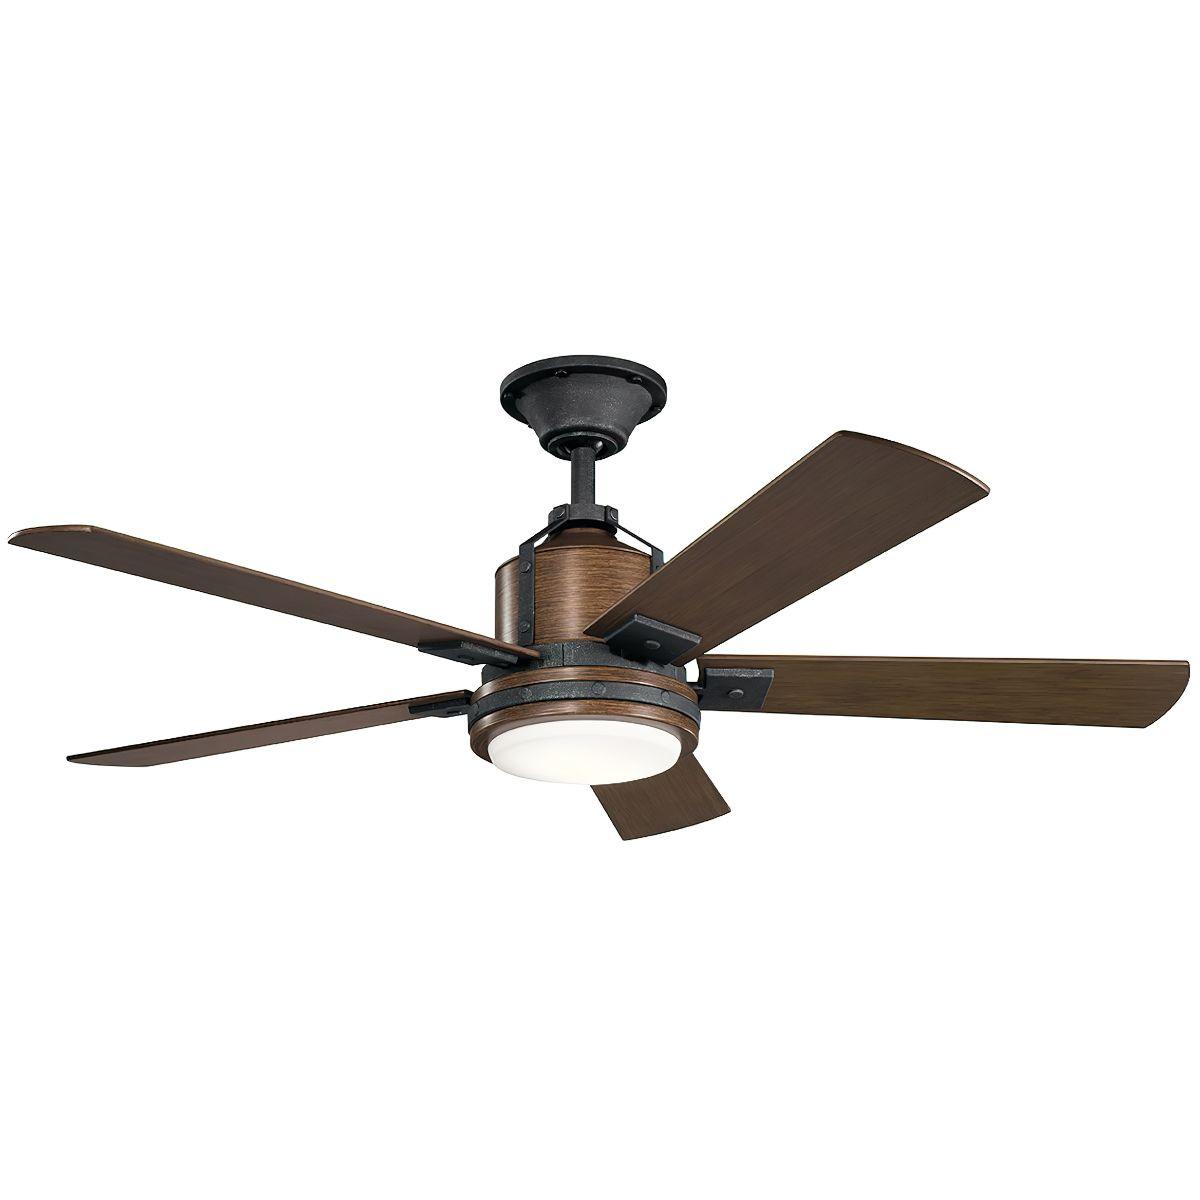 Colerne 52 Inch Rustic Ceiling Fan With Light, Wall Control Included - Bees Lighting